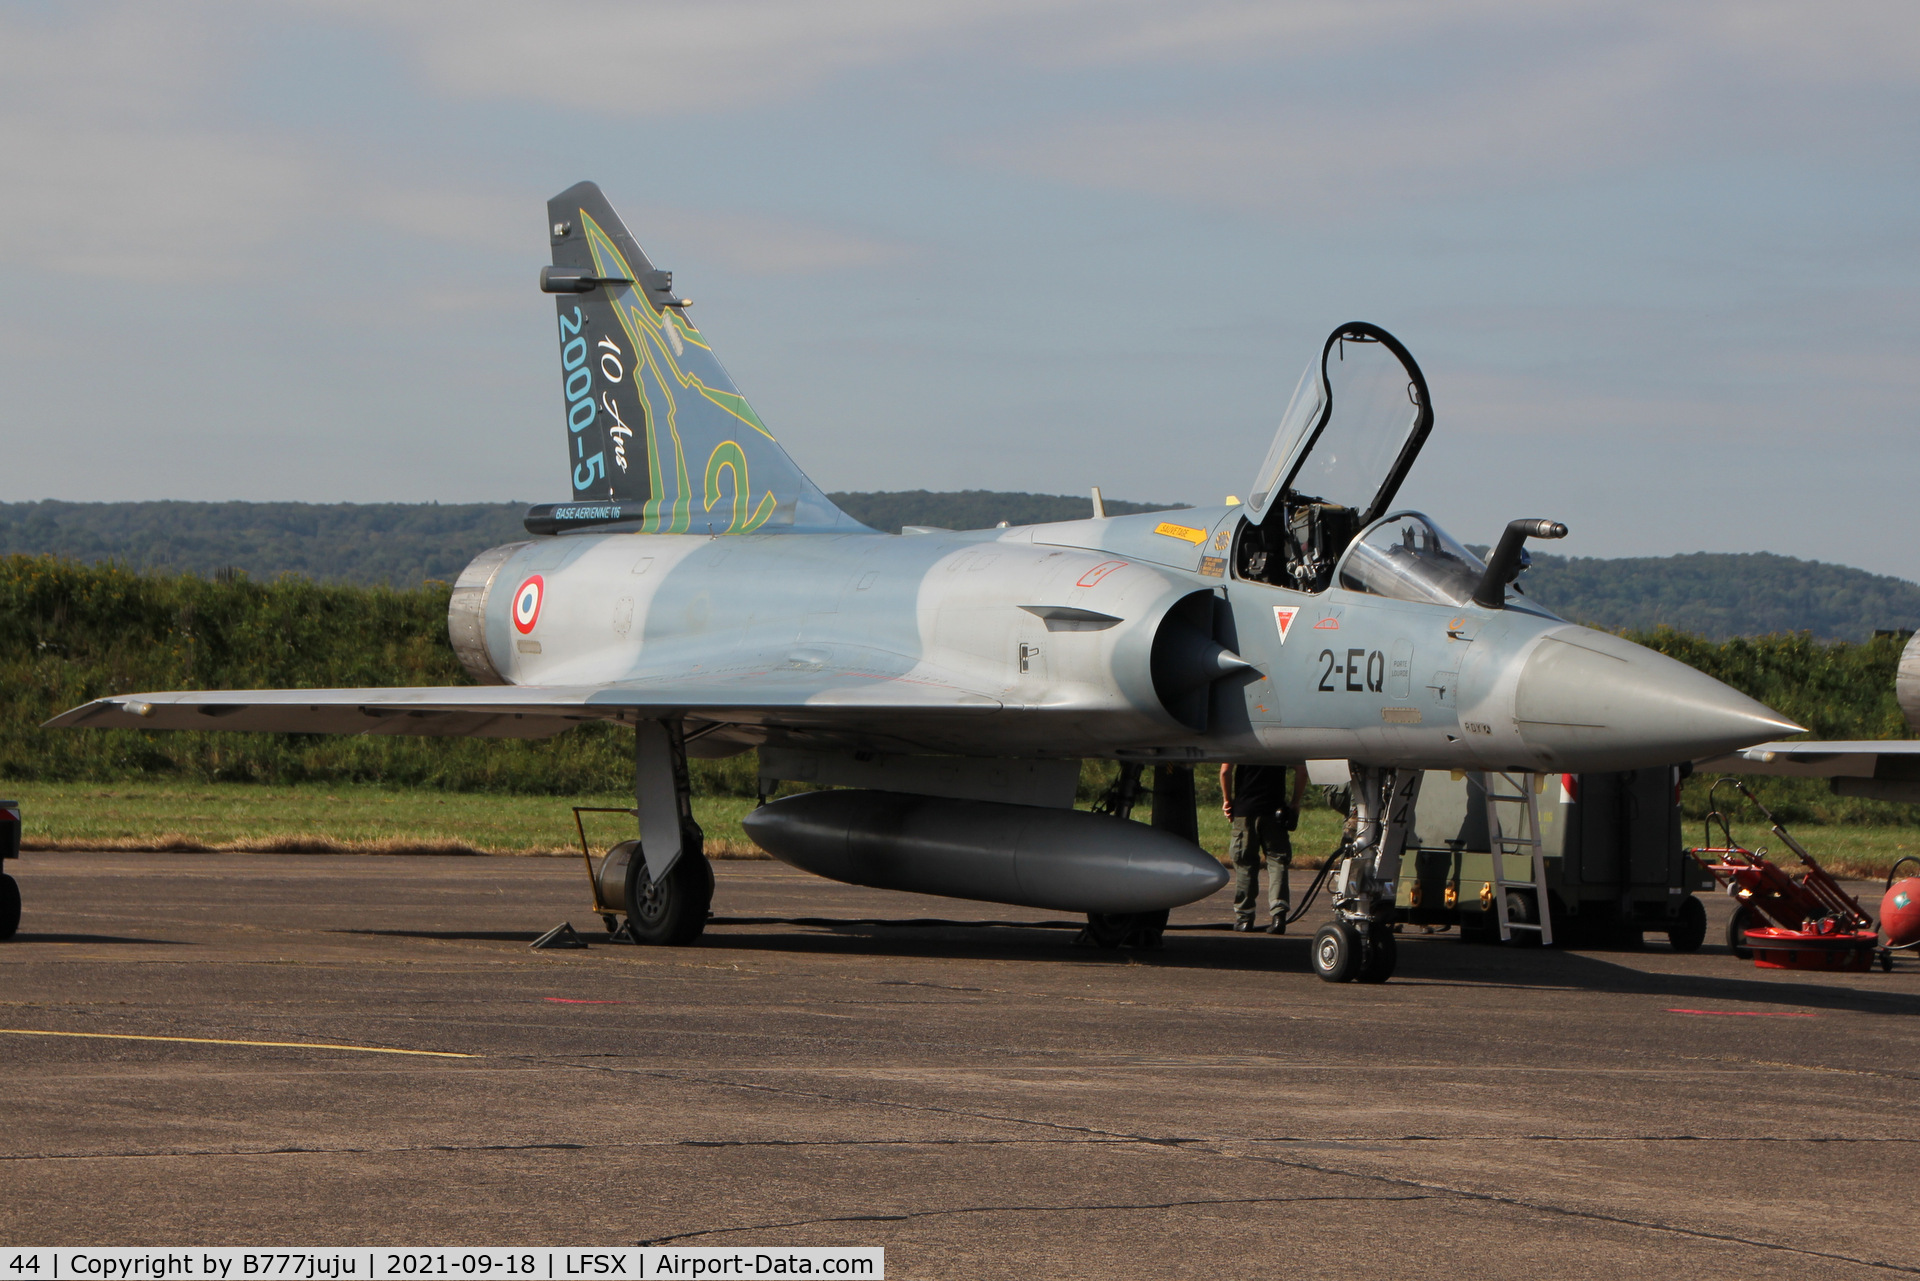 44, Dassault Mirage 2000-5F C/N 208, during Luxeuil Air Show 2021
peint for 10 service years Mirage 2000-5F at 2EC